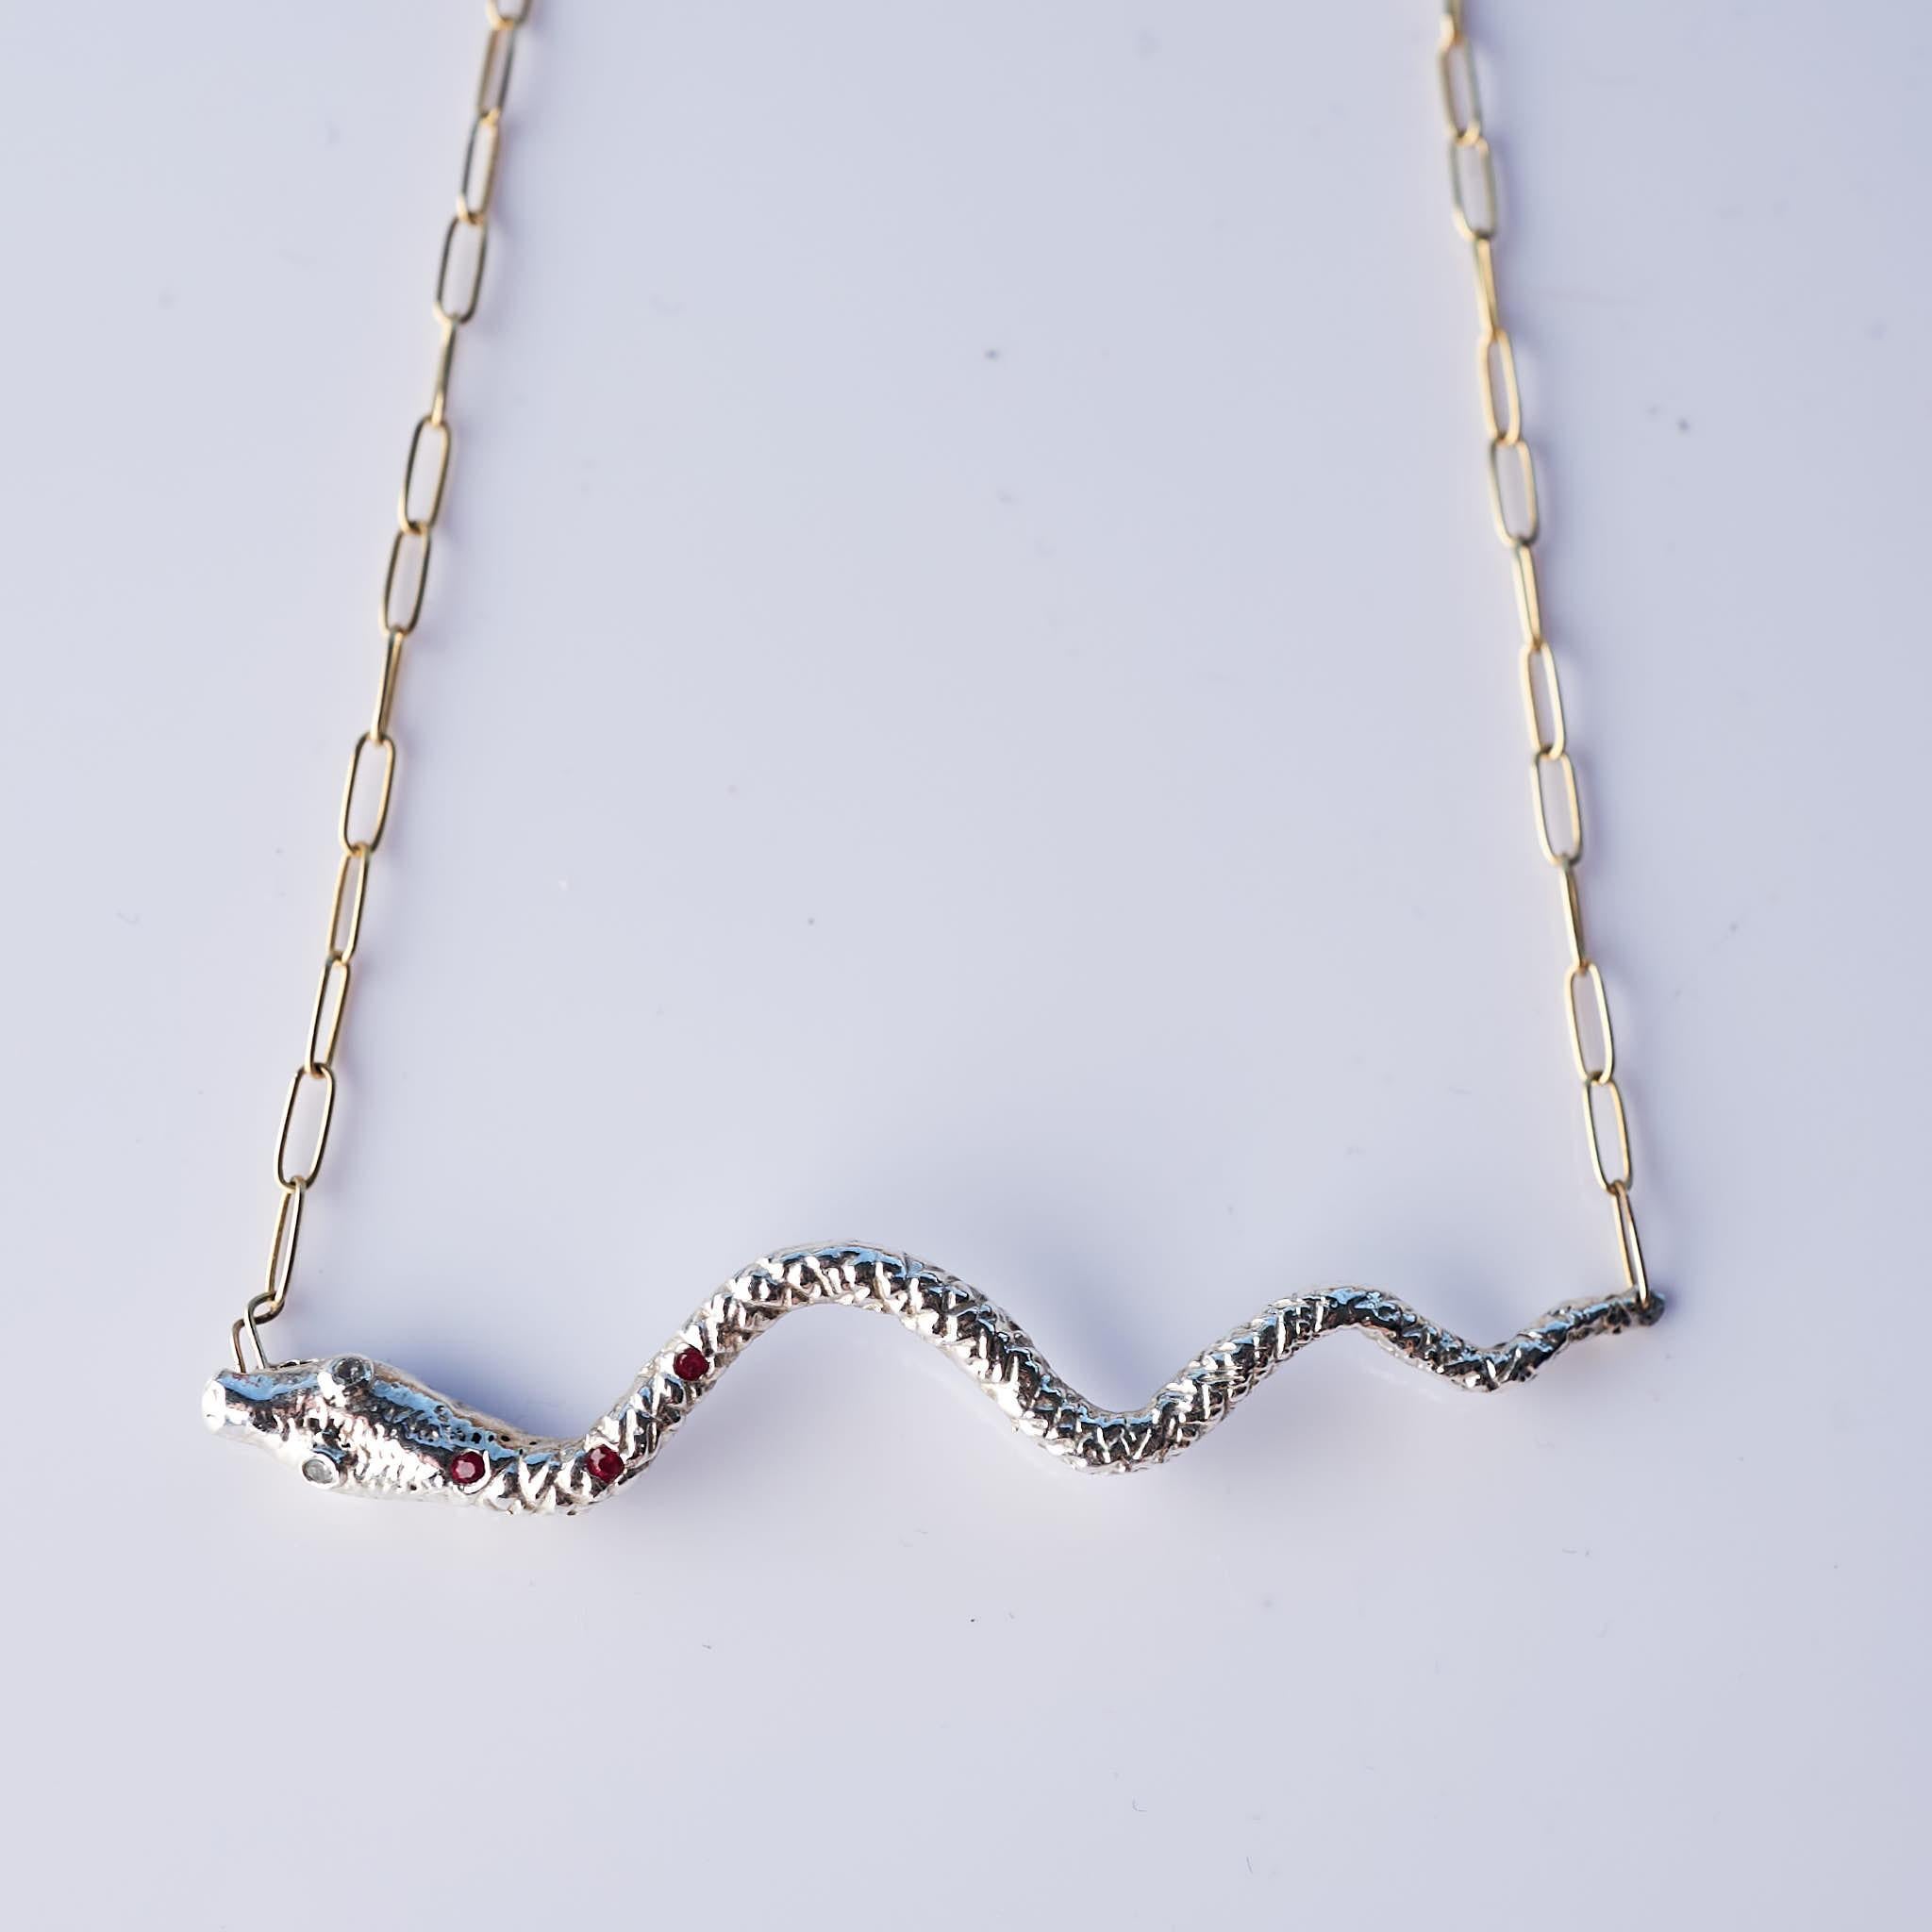 Ruby Aquamarine Snake Necklace Choker Chain Silver J Dauphin

Can be worn as a choker or linger - chain is adjustable - available as 20 inch but can be worn as in any size shorter.

J DAUPHIN Necklace with pendant snake in silver with yellow gold